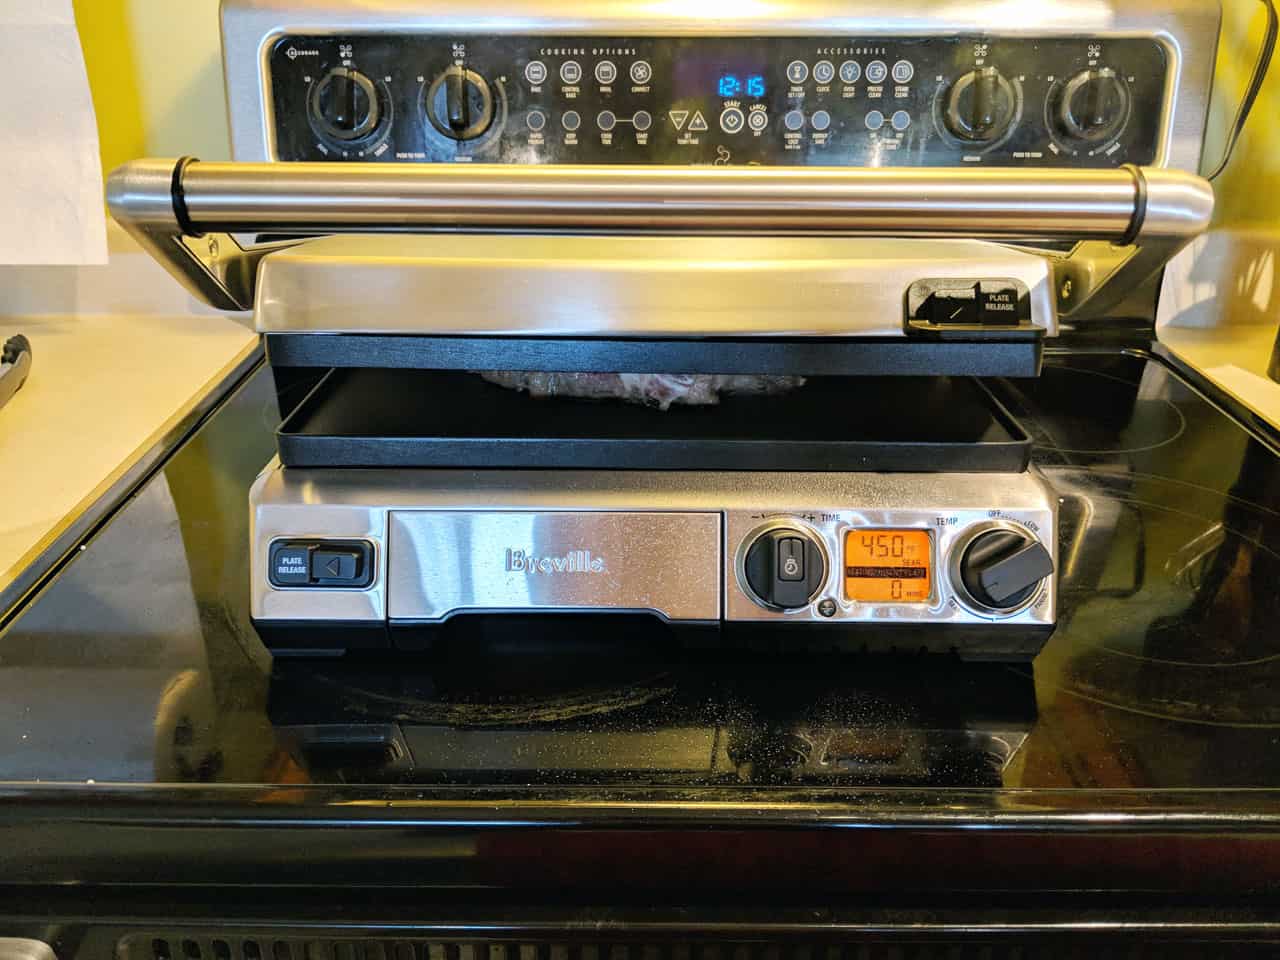 Breville Smart Panini Grill & Griddle